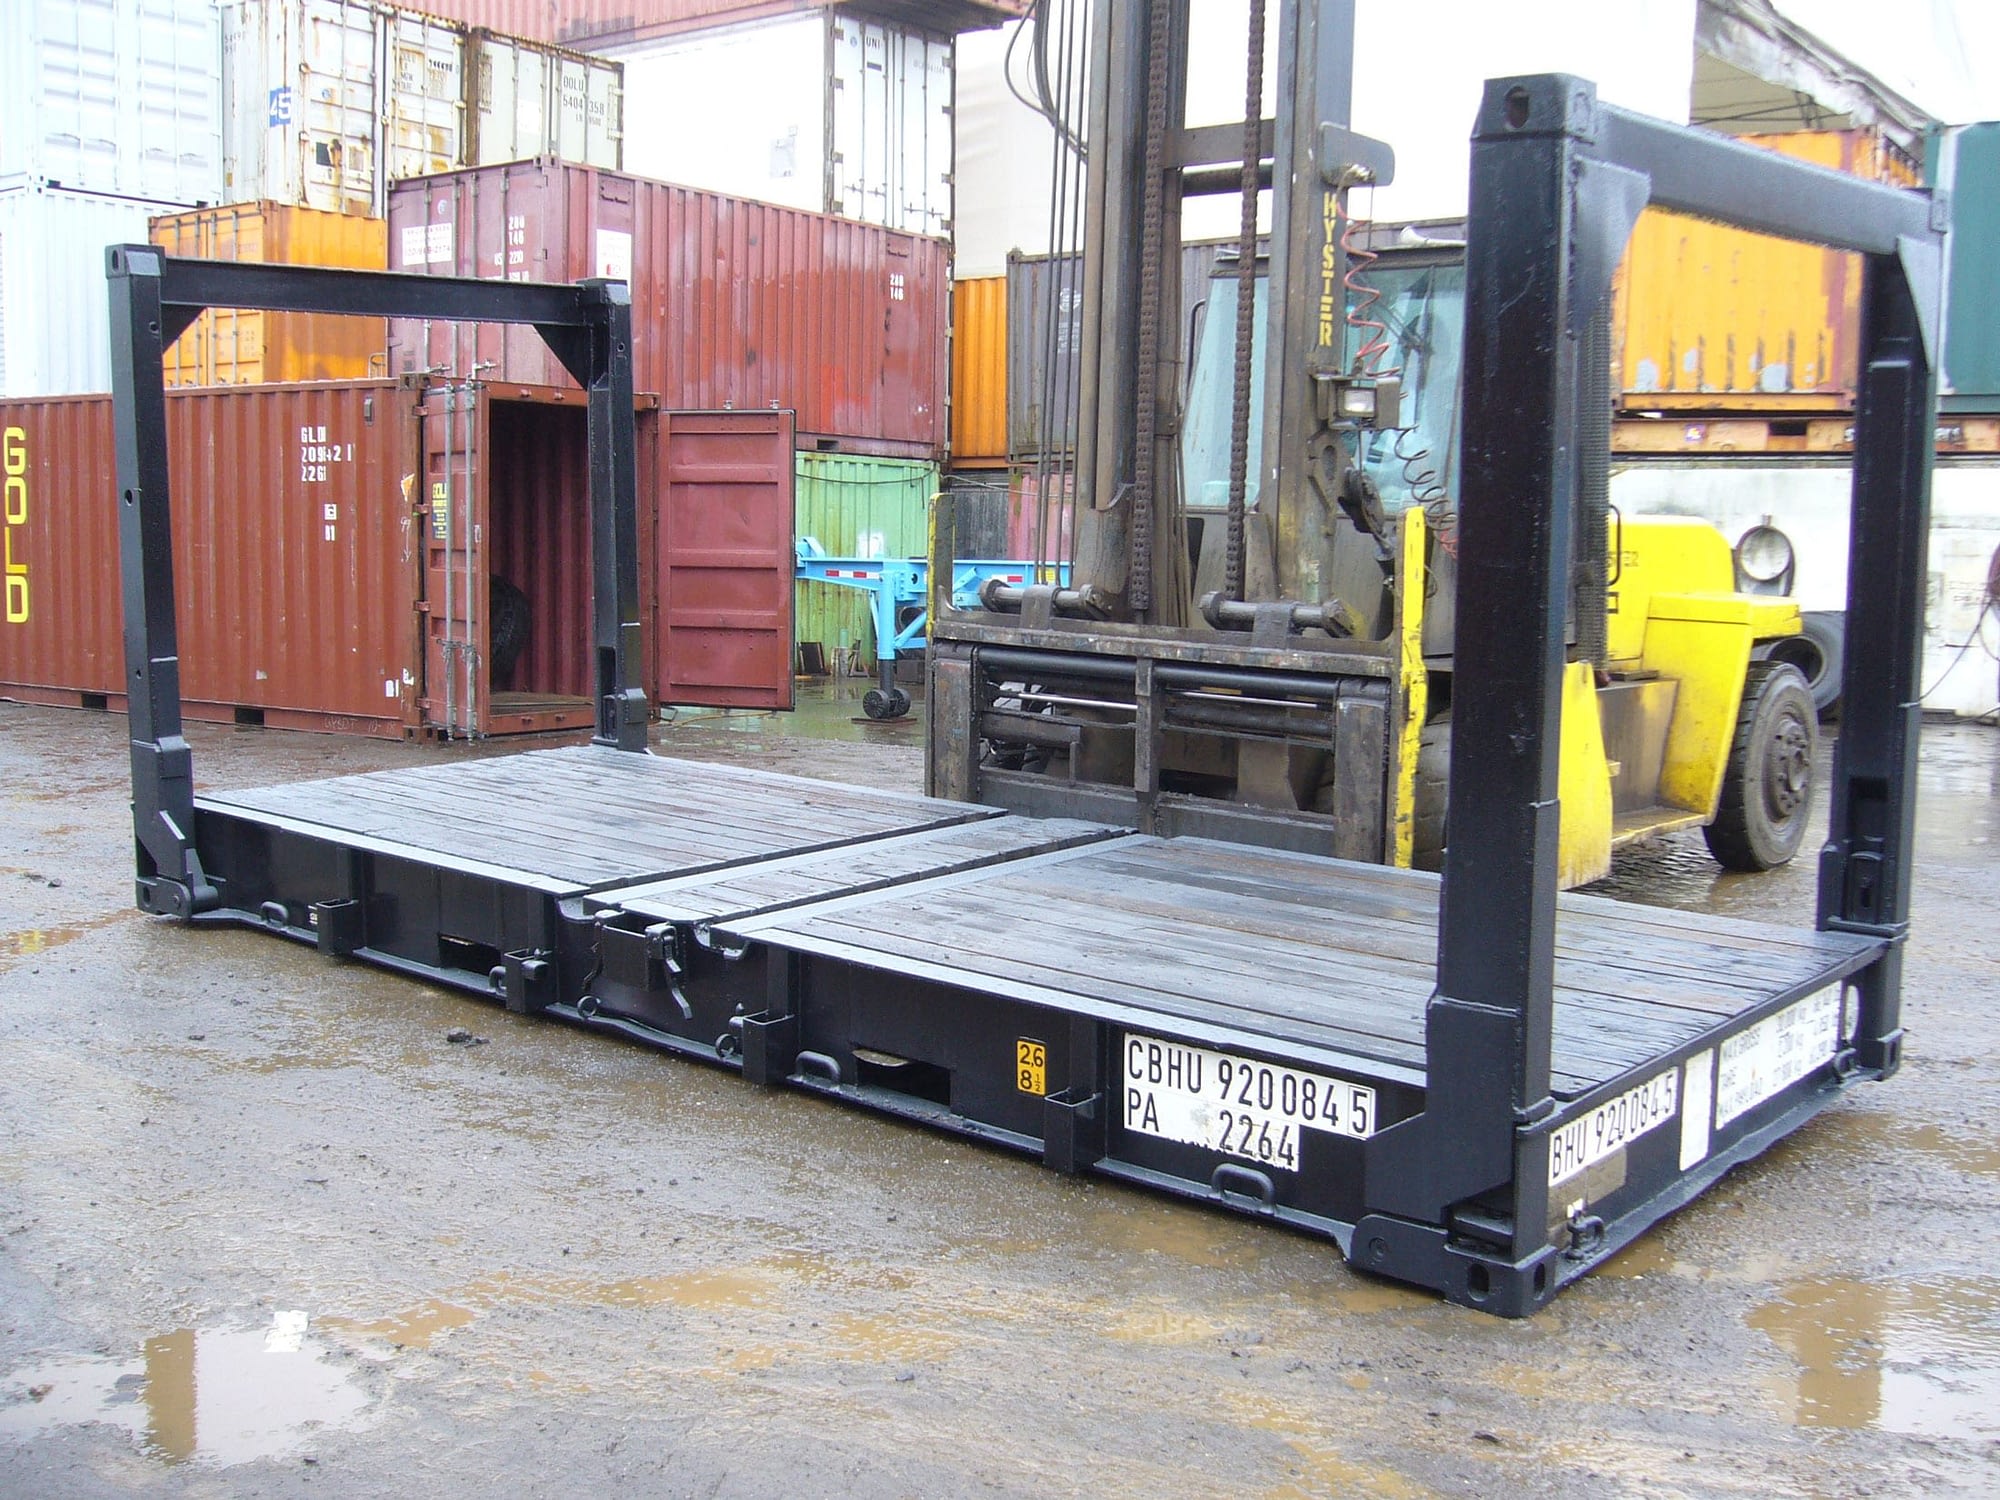 TRS Containers stocks cargo worthy used 20 foot and 40 foot long ISO flatrack containers